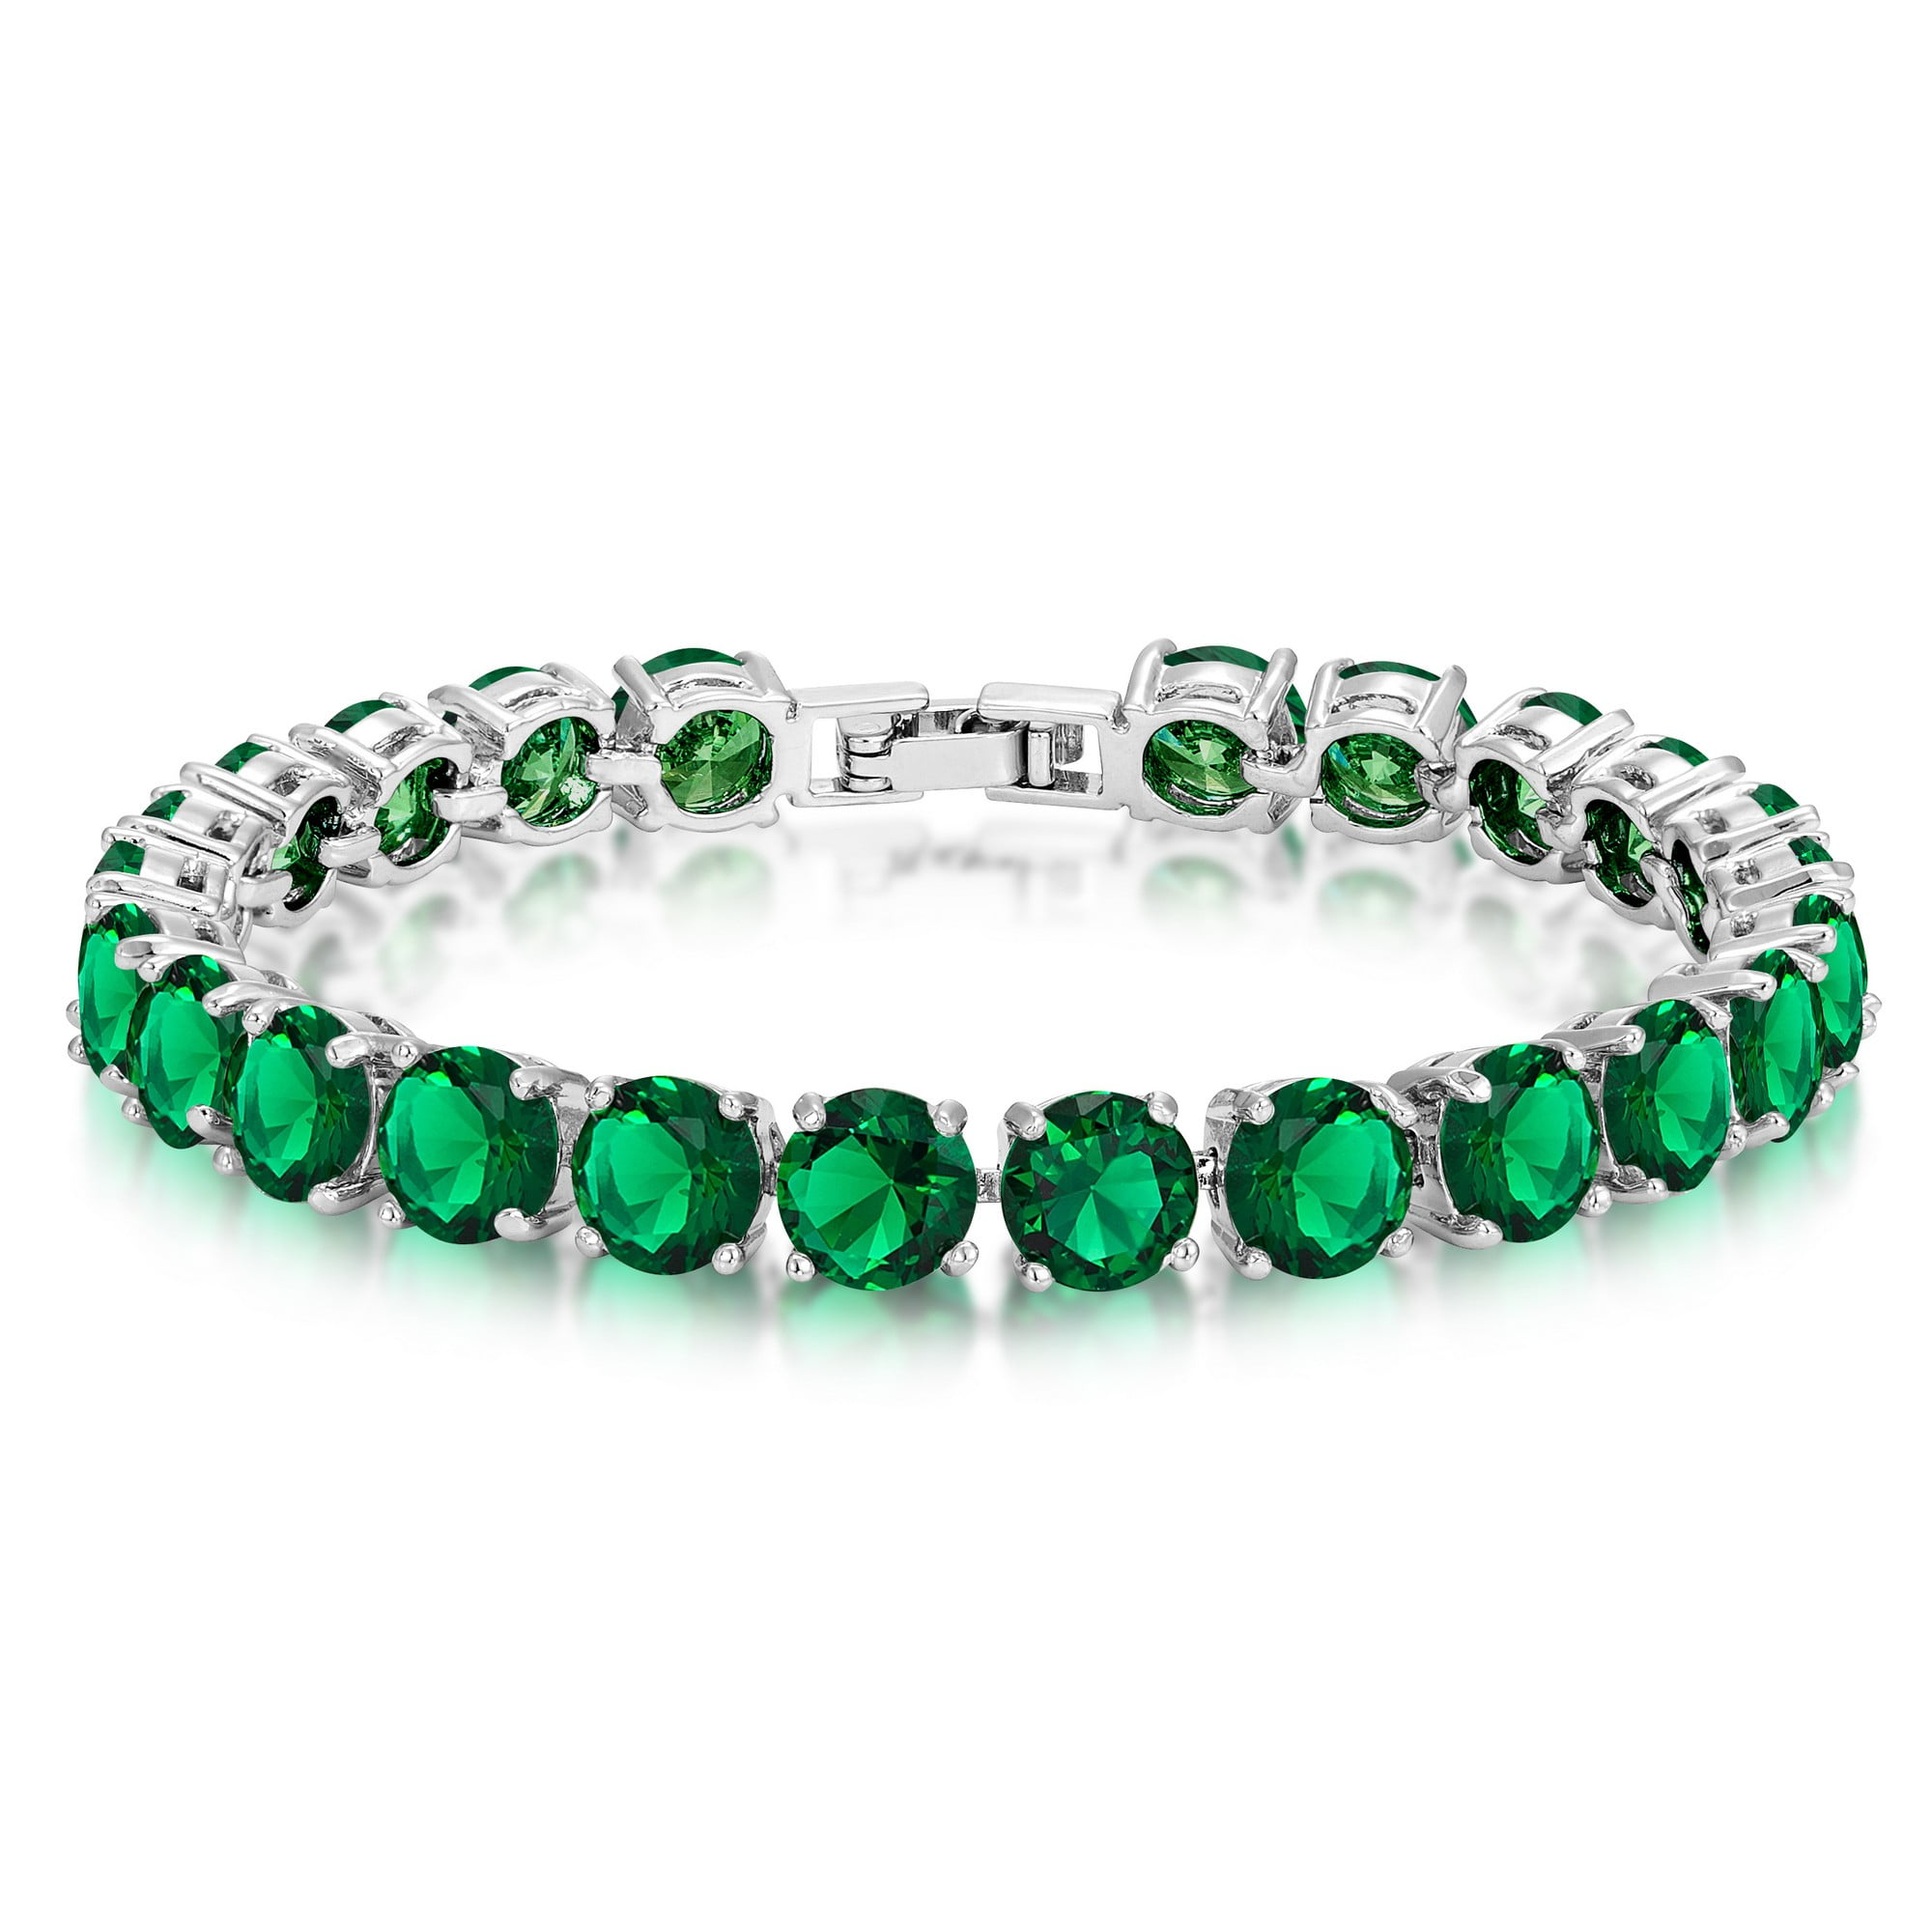 Natural Pave Diamond 925 Sterling Silver Handmade Emerald Bracelet  Anniversary Gift For Her at Rs 7500.00/piece | Jaipur | ID: 25977980530